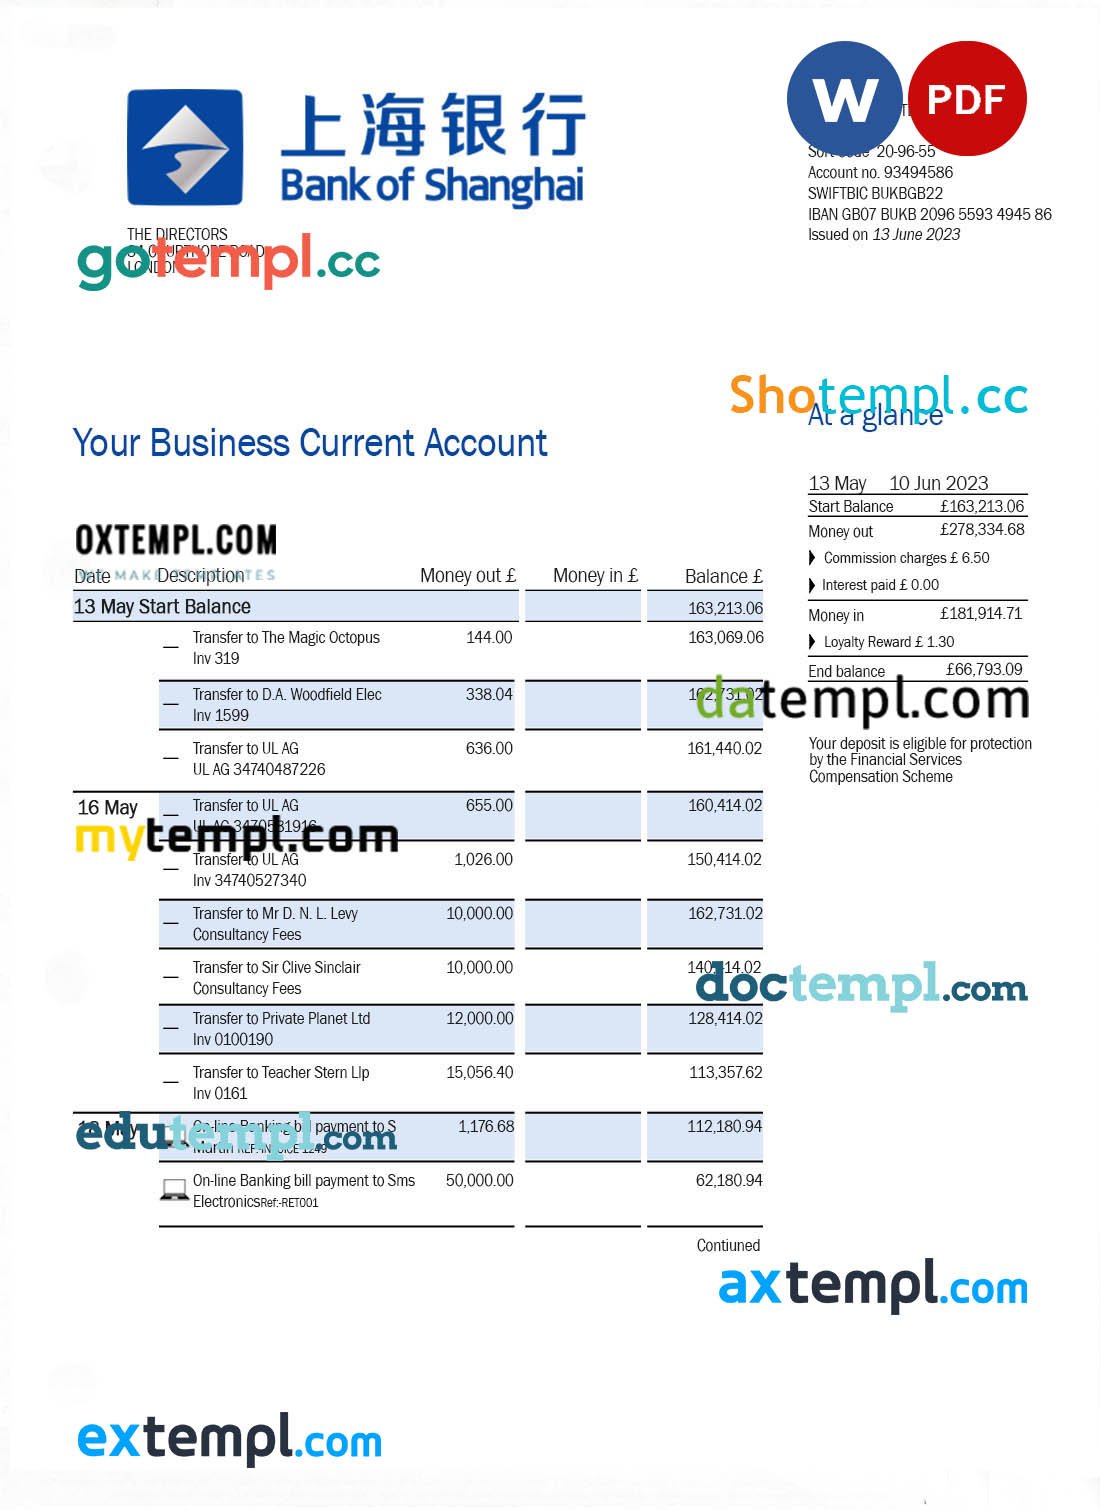 Japan S-Energy Japan Co. Ltd. Tokyo Branch utility bill template in Word and PDF format